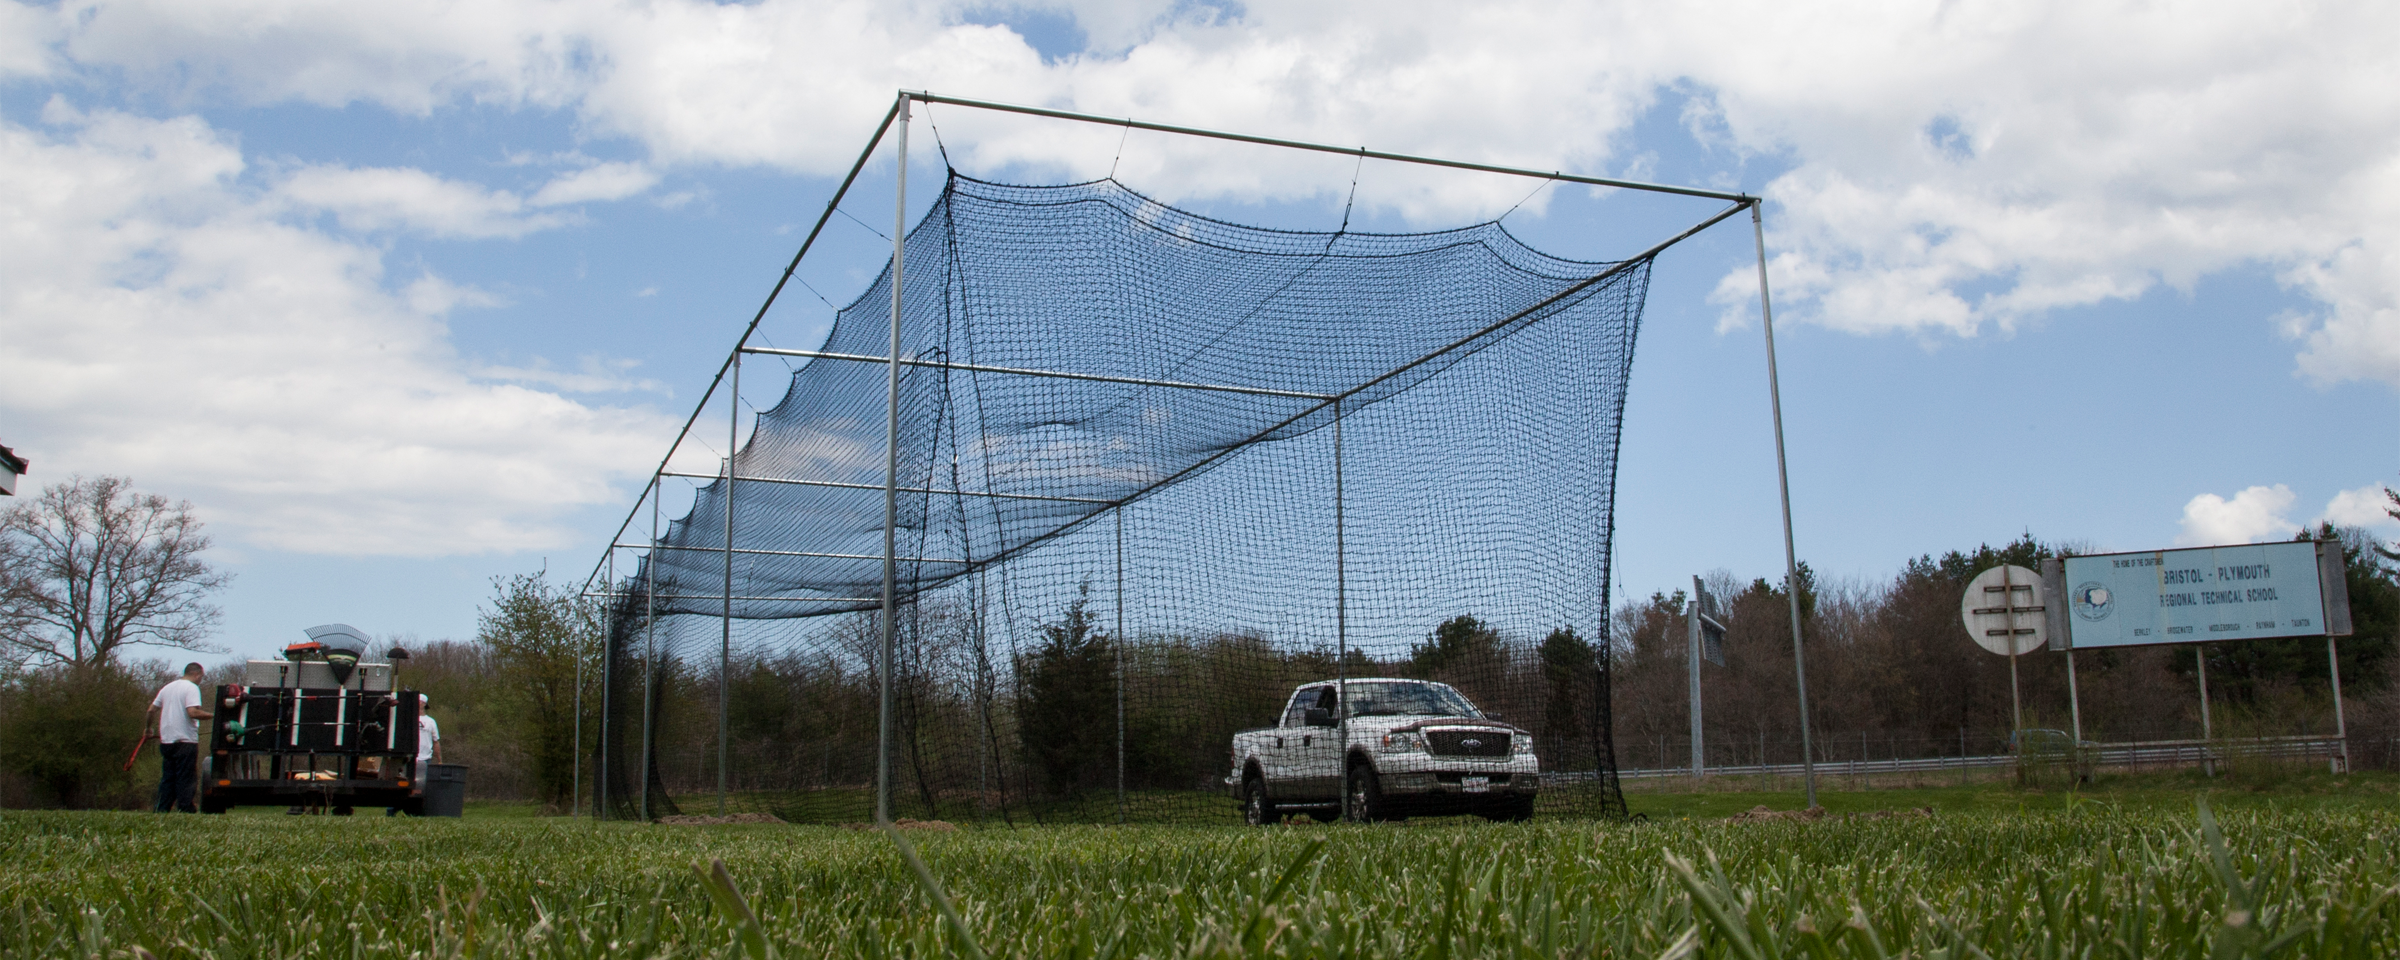 Learn more about the ProMounds batting cage kit from On Deck Sports